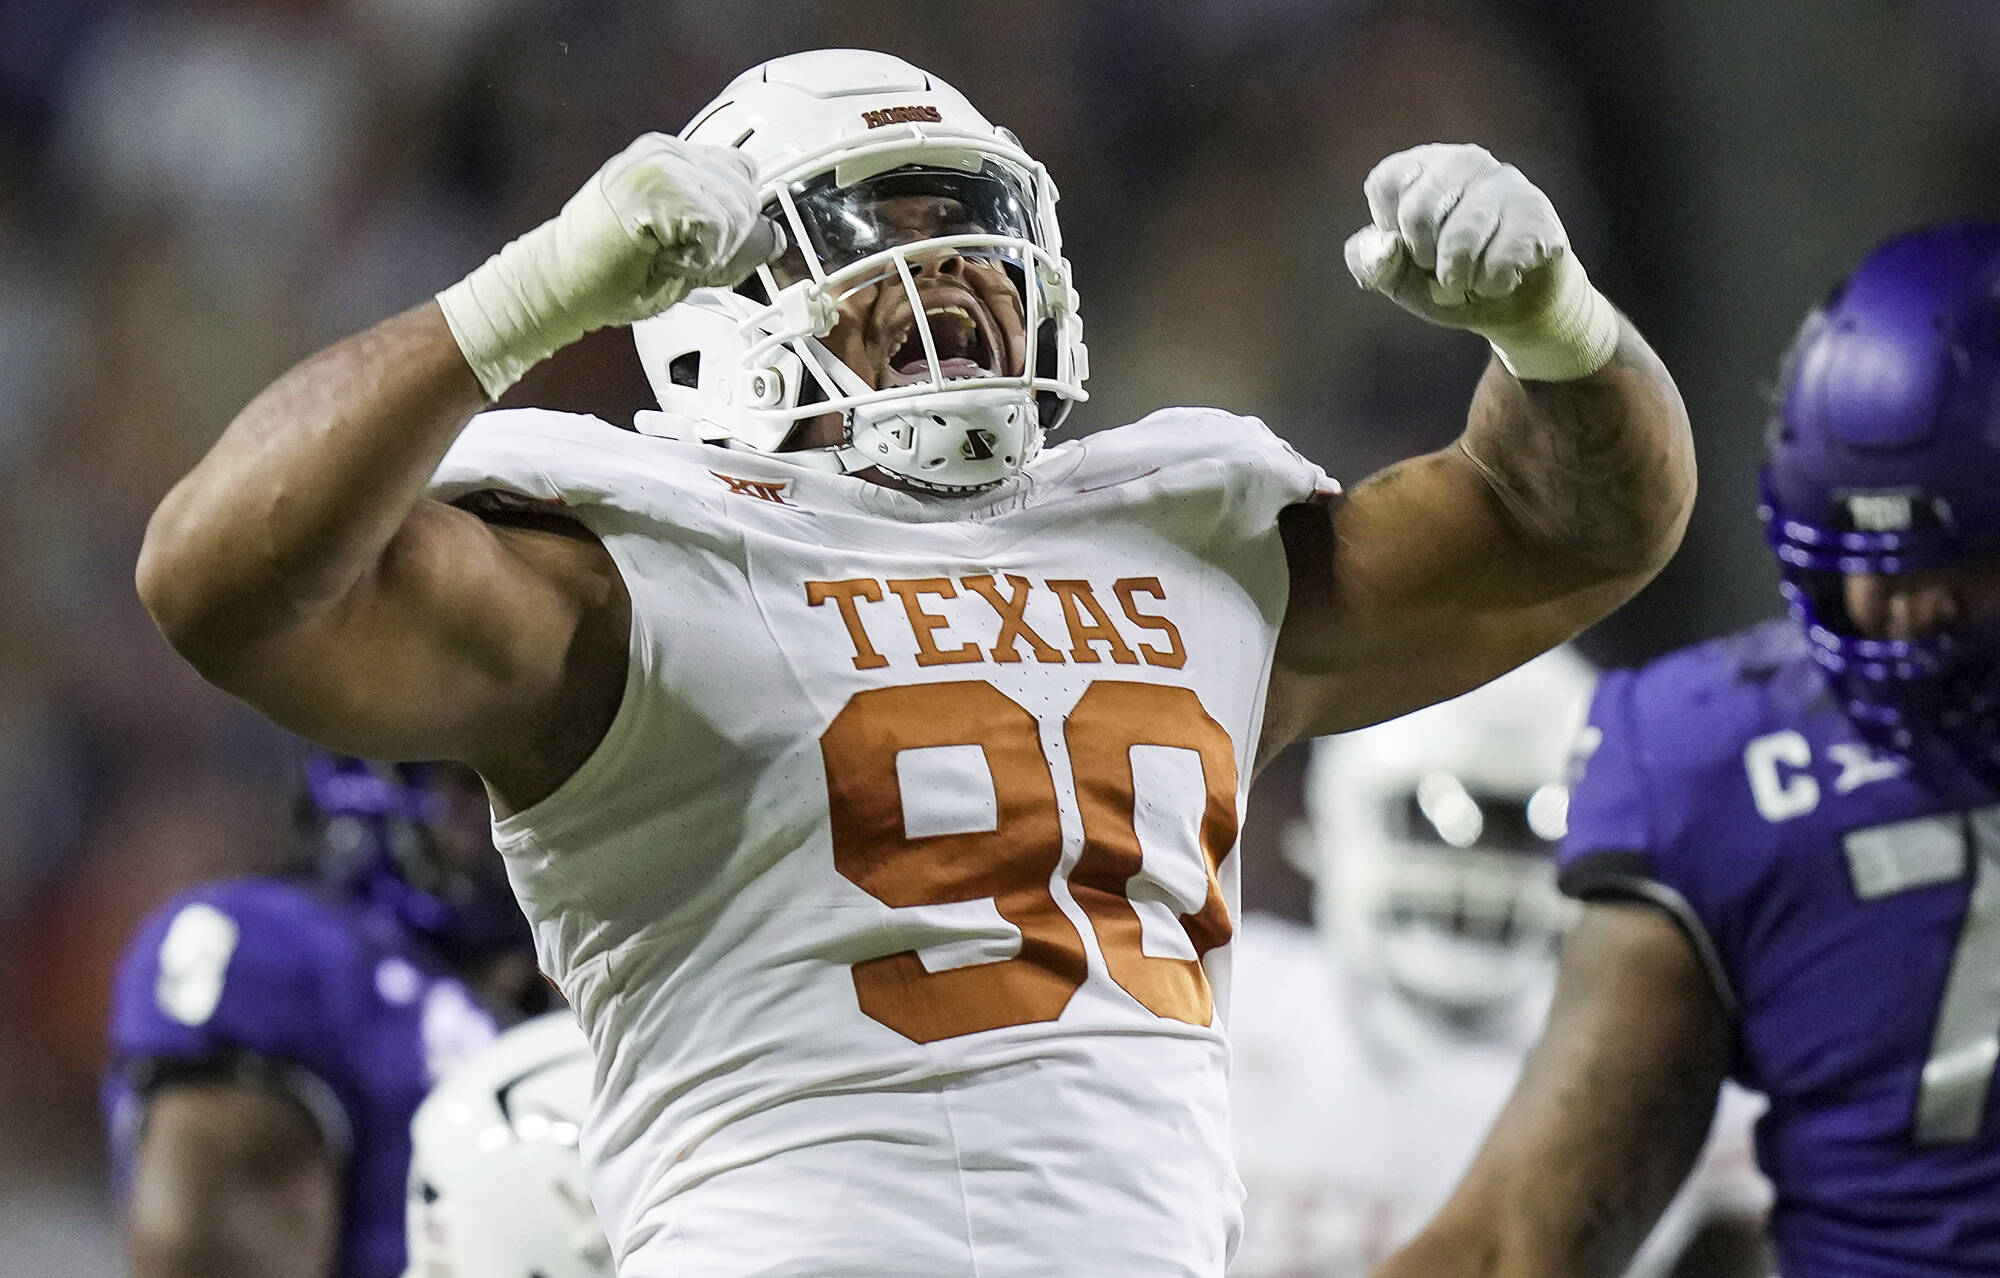 Texas defensive lineman Byron Murphy II (90) was selected in the first round, 16th overall, of the NFL draft by the Seattle Seahawks. (Ricardo B. Brazziell/Austin American-Statesman via AP, File)